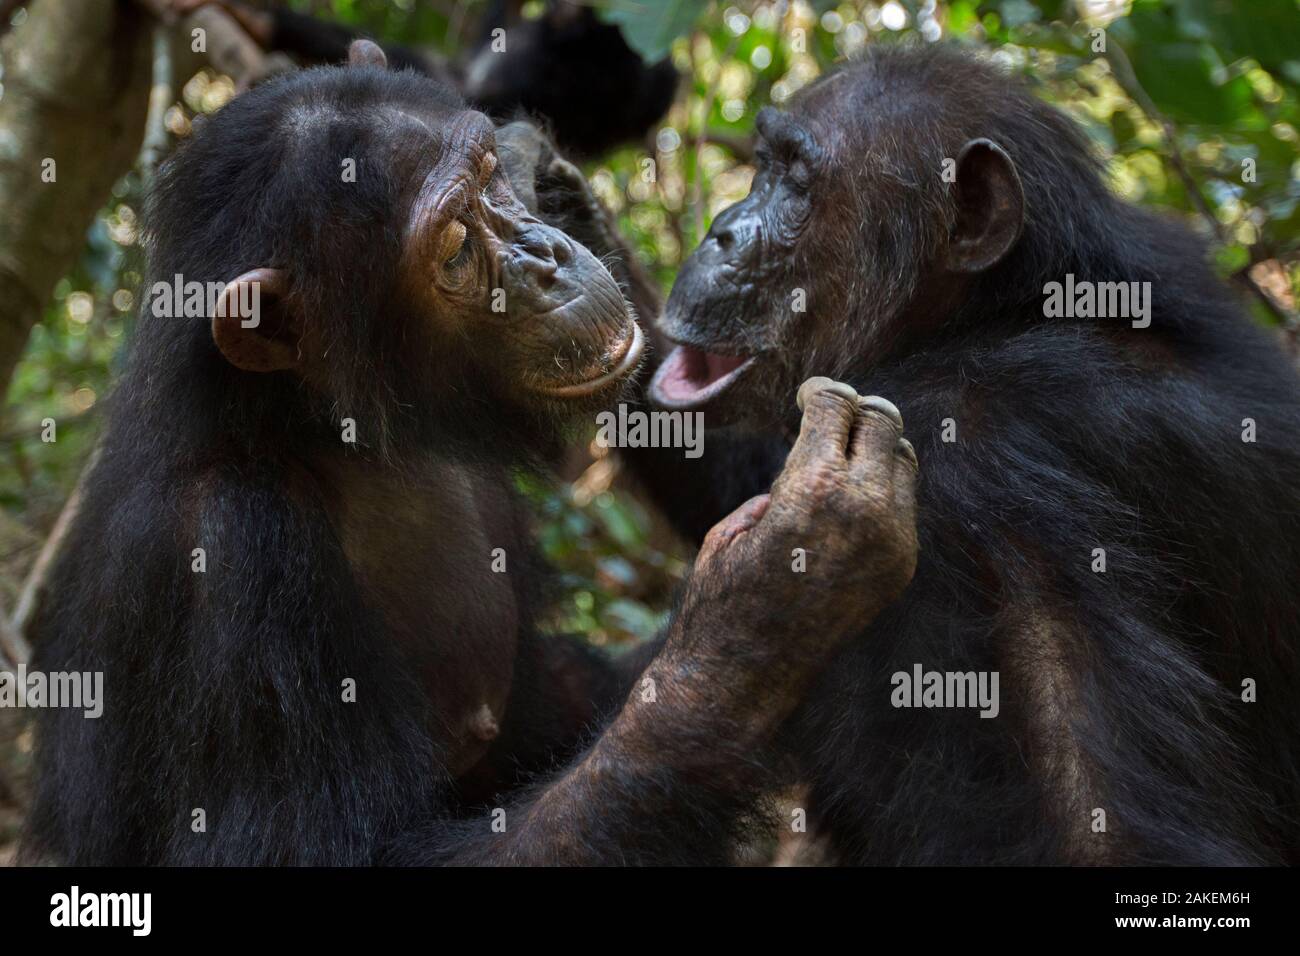 Eastern chimpanzee  (Pan troglodytes schweinfurtheii) female 'Gremlin' aged 42 years being groomed by her daughter 'Golden' aged 15 years.Gombe National Park, Tanzania. September 2013. Stock Photo